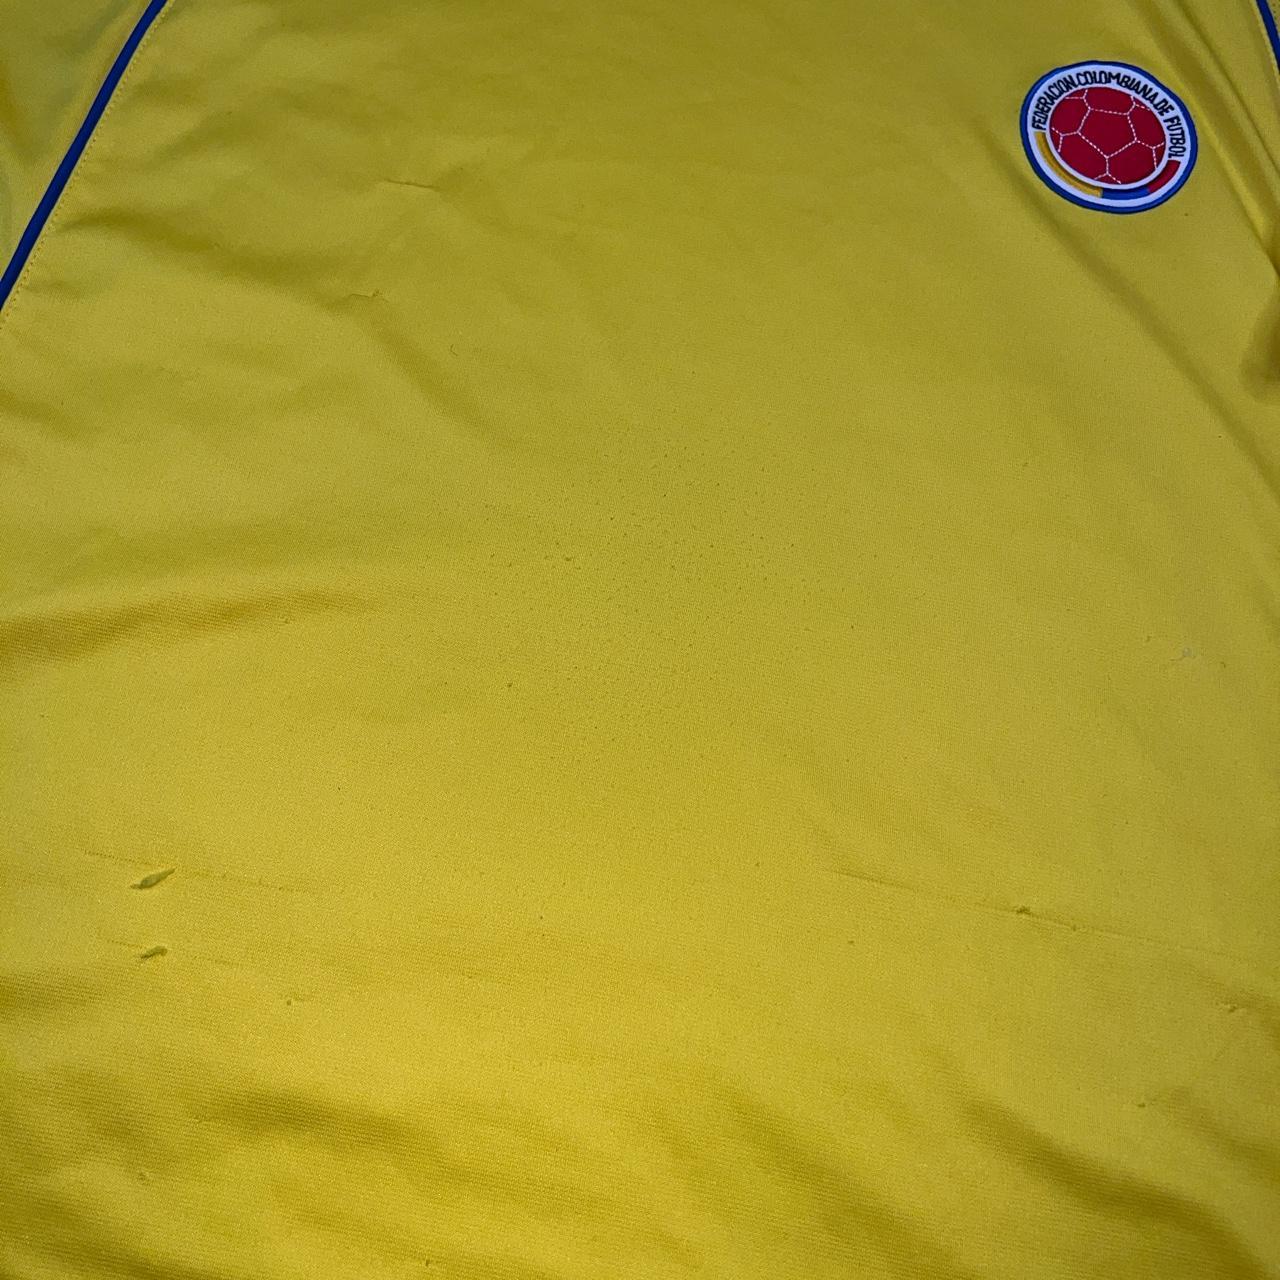 Lotto Men's Yellow and Blue Shirt (3)